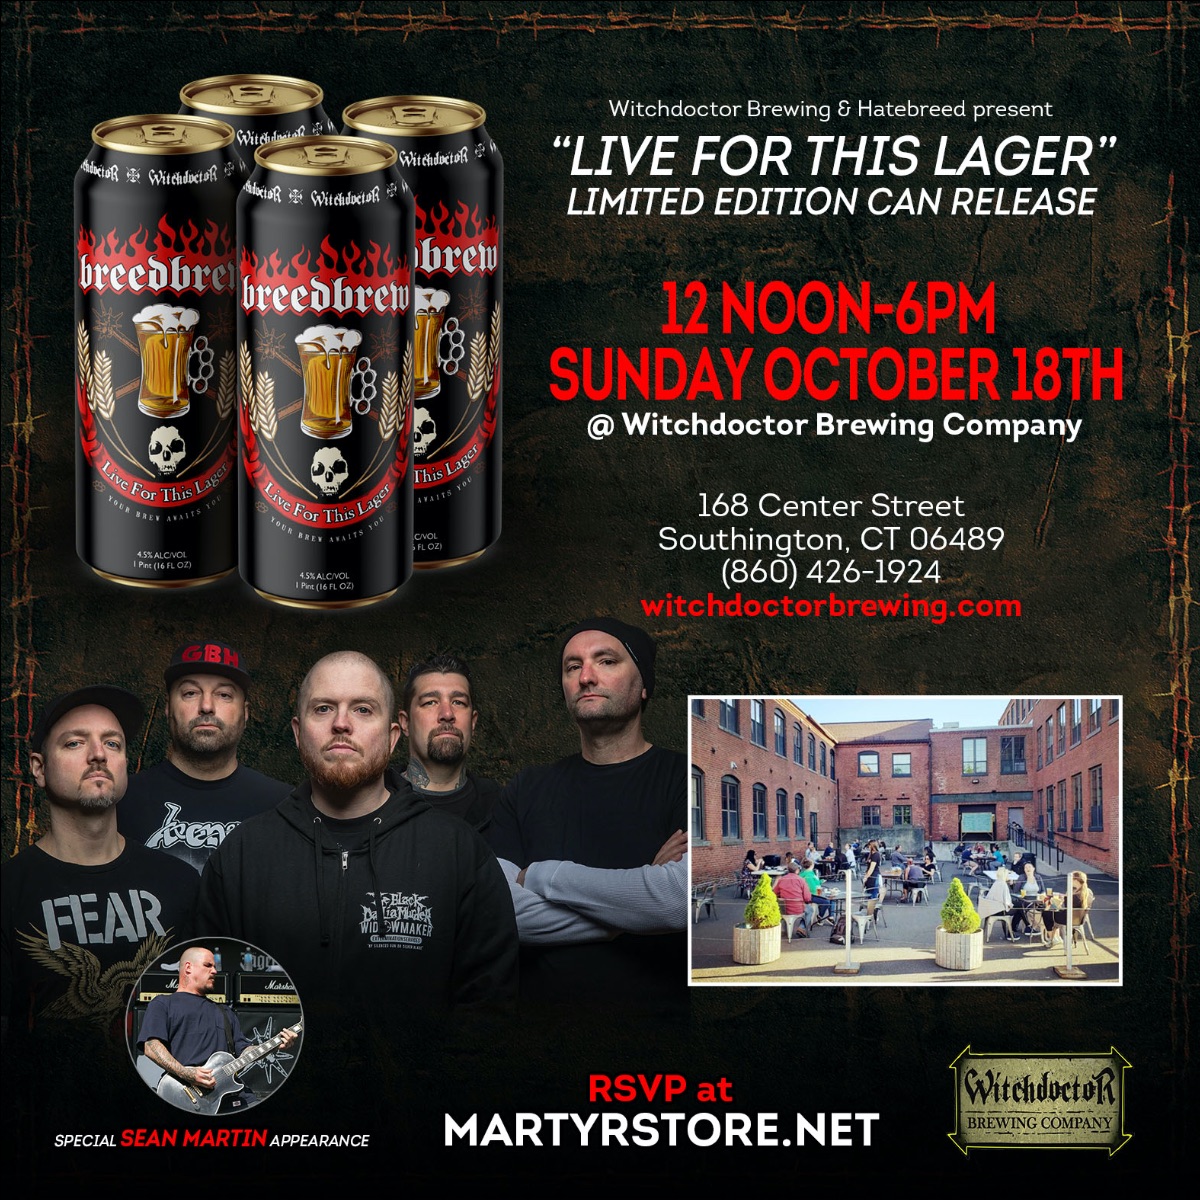 Hatebreed Live For This Lager Now Available in Cans + Exclusive Event Sunday, 10/18